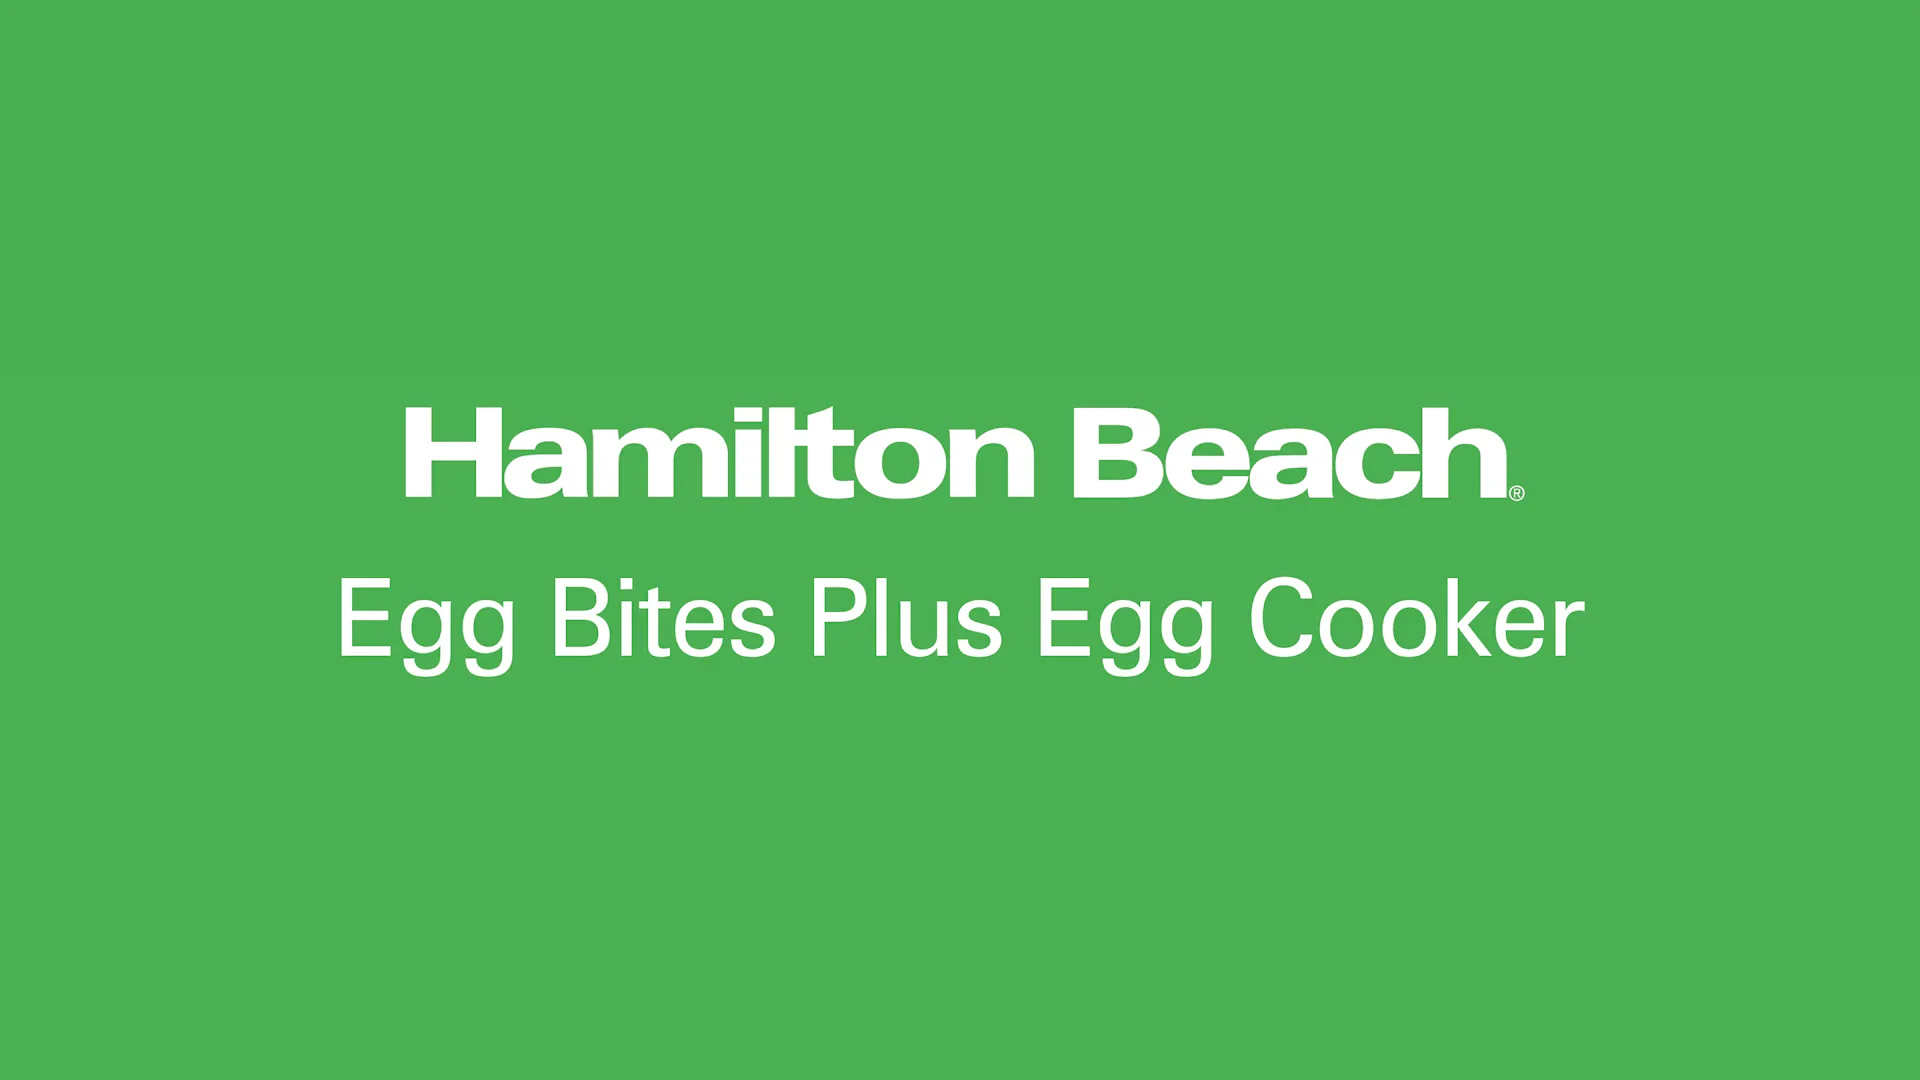  Hamilton Beach 6-in-1 Electric Egg Bites Cooker Plus and  Poacher, Grey (25510) & Dual Breakfast Sandwich Maker with Timer, Silver  (25490A): Home & Kitchen